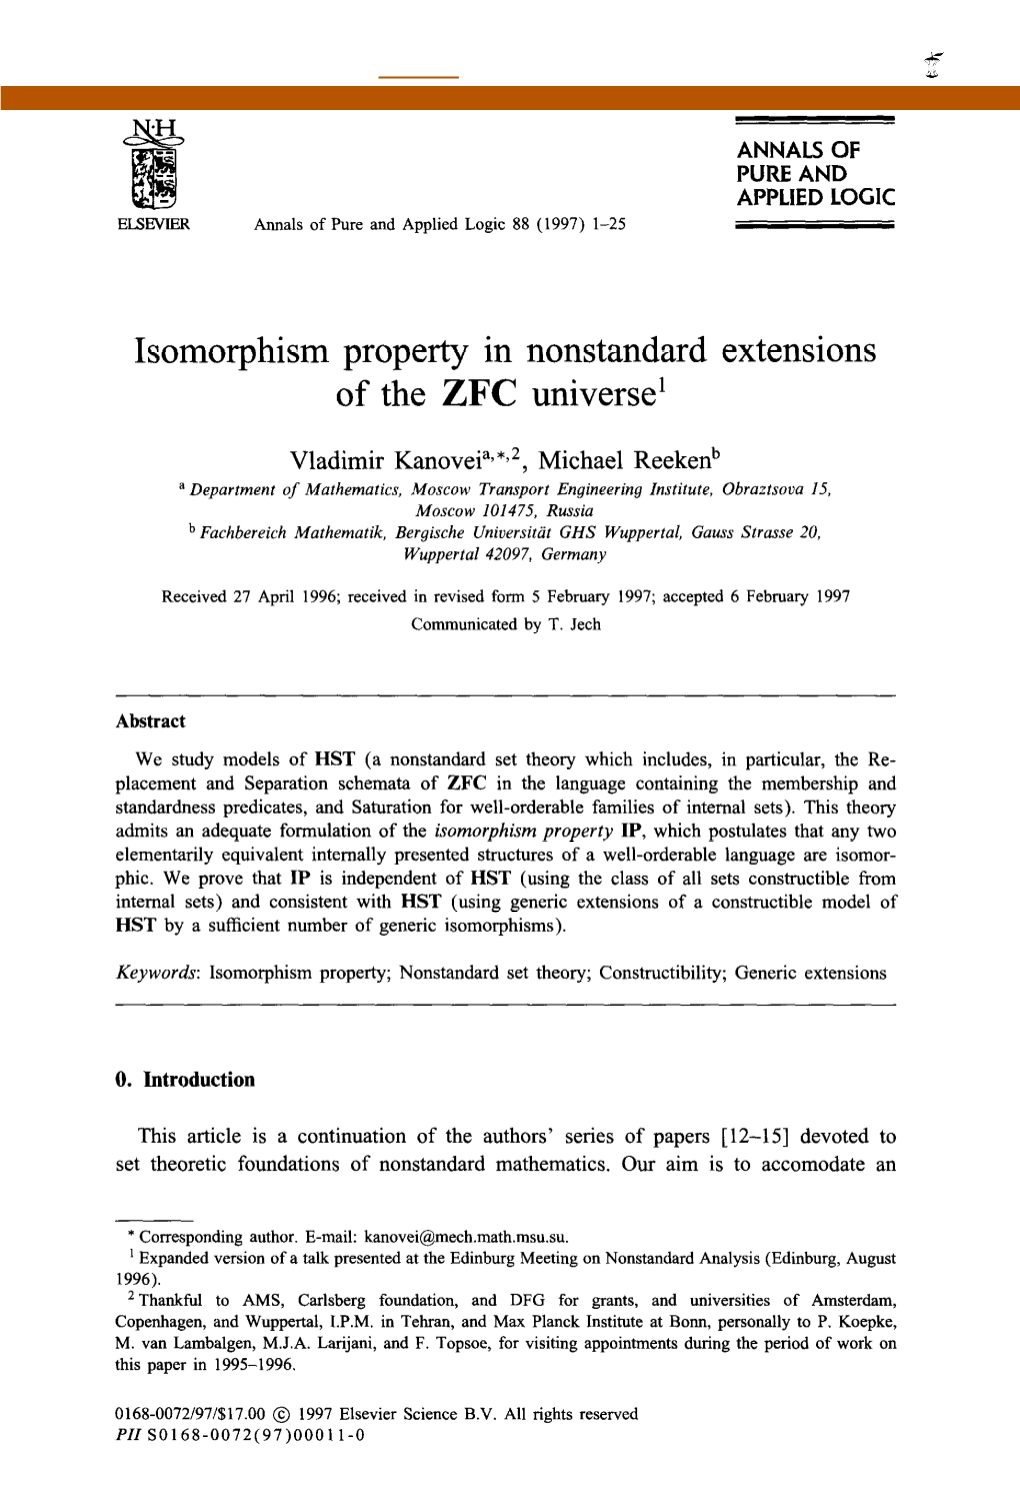 Isomorphism Property in Nonstandard Extensions of the ZFC Universe'